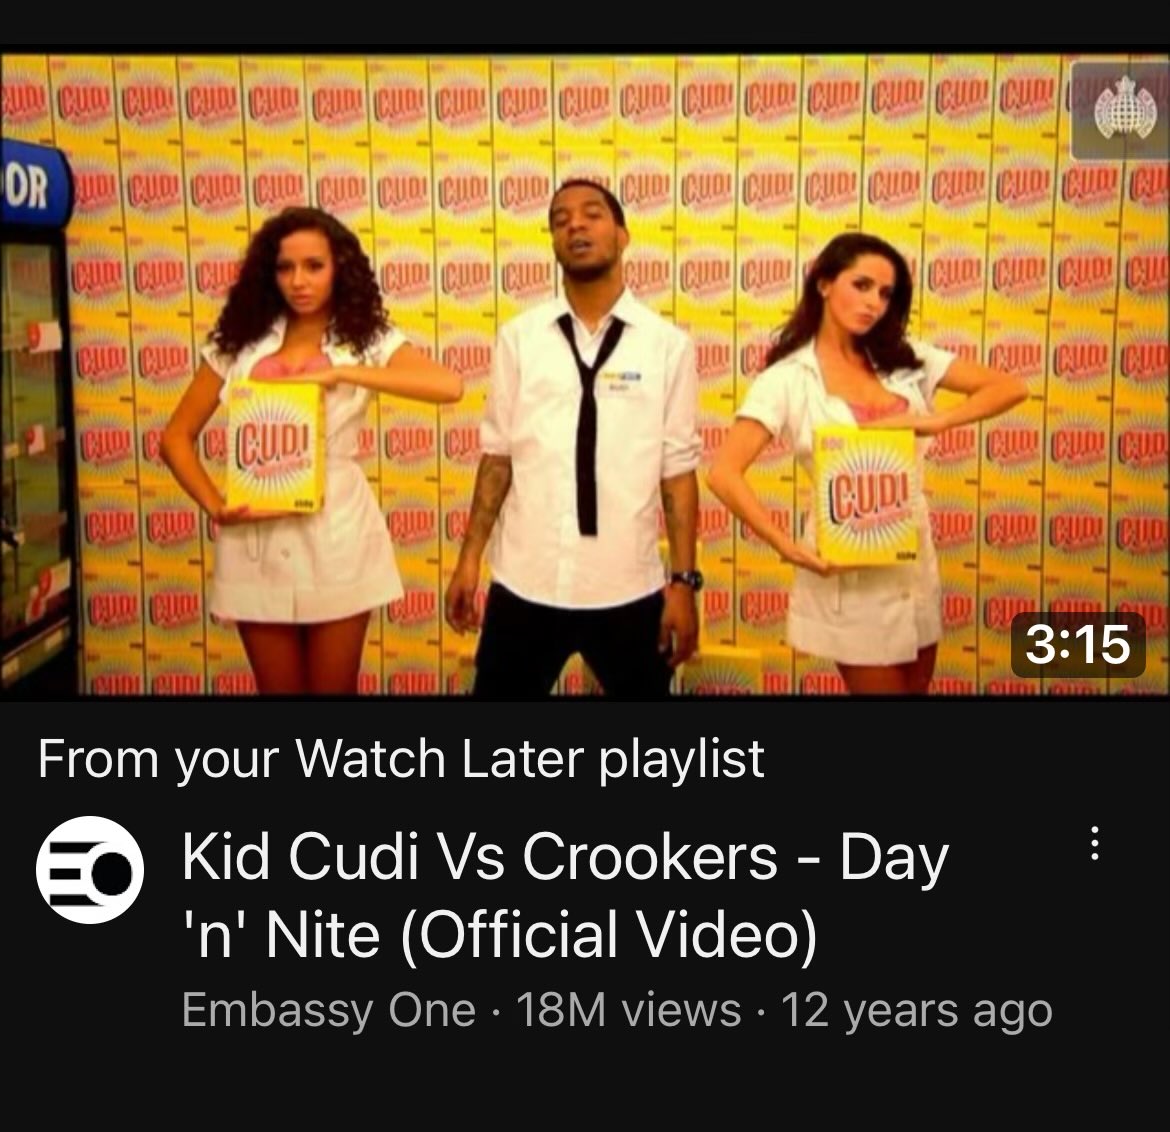 why do i have this in my watch later. did i think i was going to lose it. was i going to refer to it in an argument. was i scared of forgetting the youtube dot com link to day ‘n’ nite by kid cudi vs crookers.